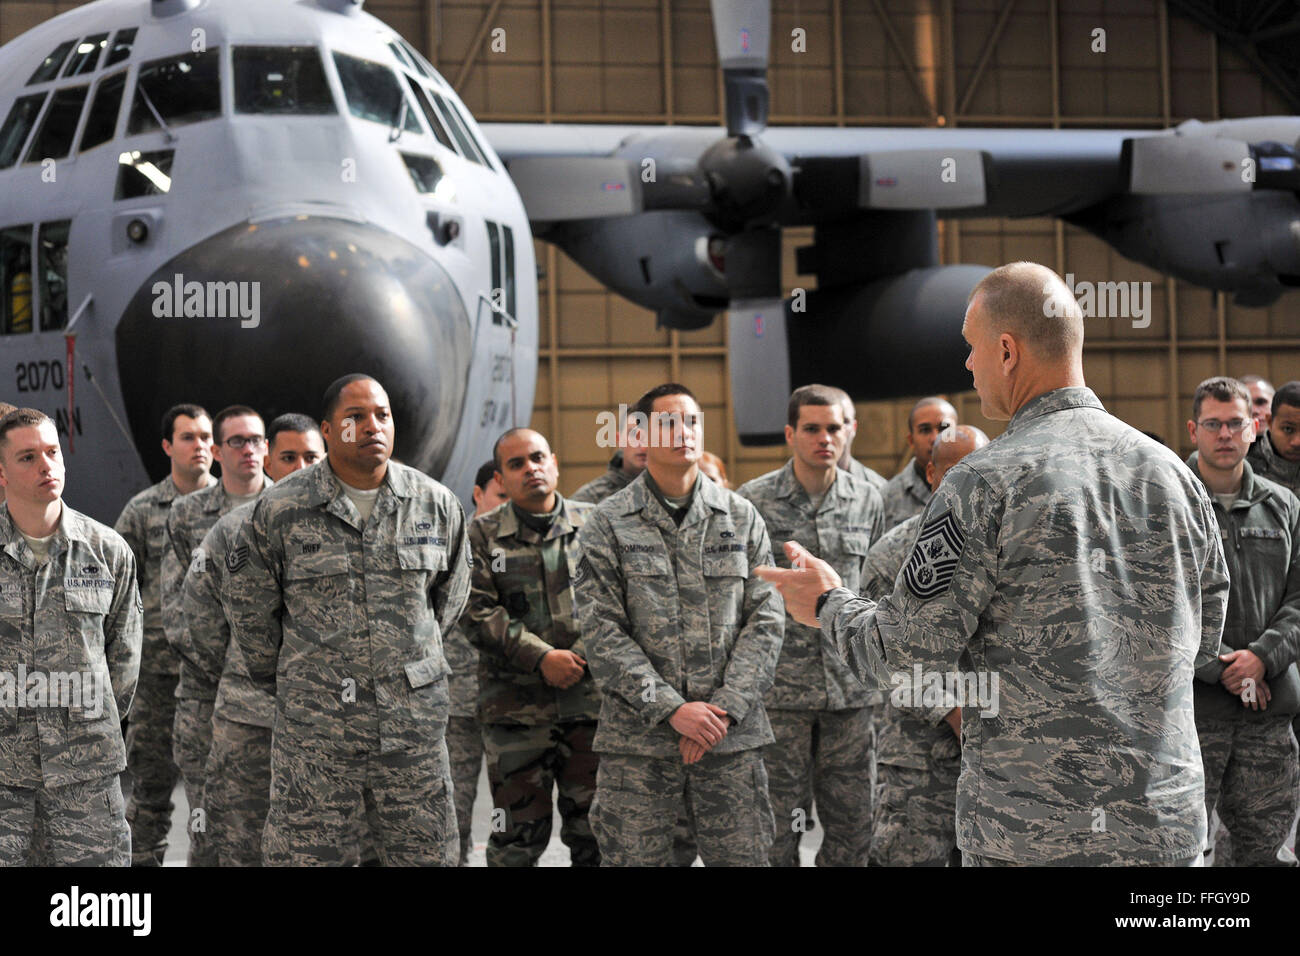 Chief Master Sgt. of the Air Force James A. Roy addresses Airmen from the 374th Maintenance Group at Yokota Air Force Base, Japan. Roy was assigned to Yokota AB from August 2005 to May 2007 as the command chief master sergeant at U.S. Forces Japan and 5th Air Force. Stock Photo